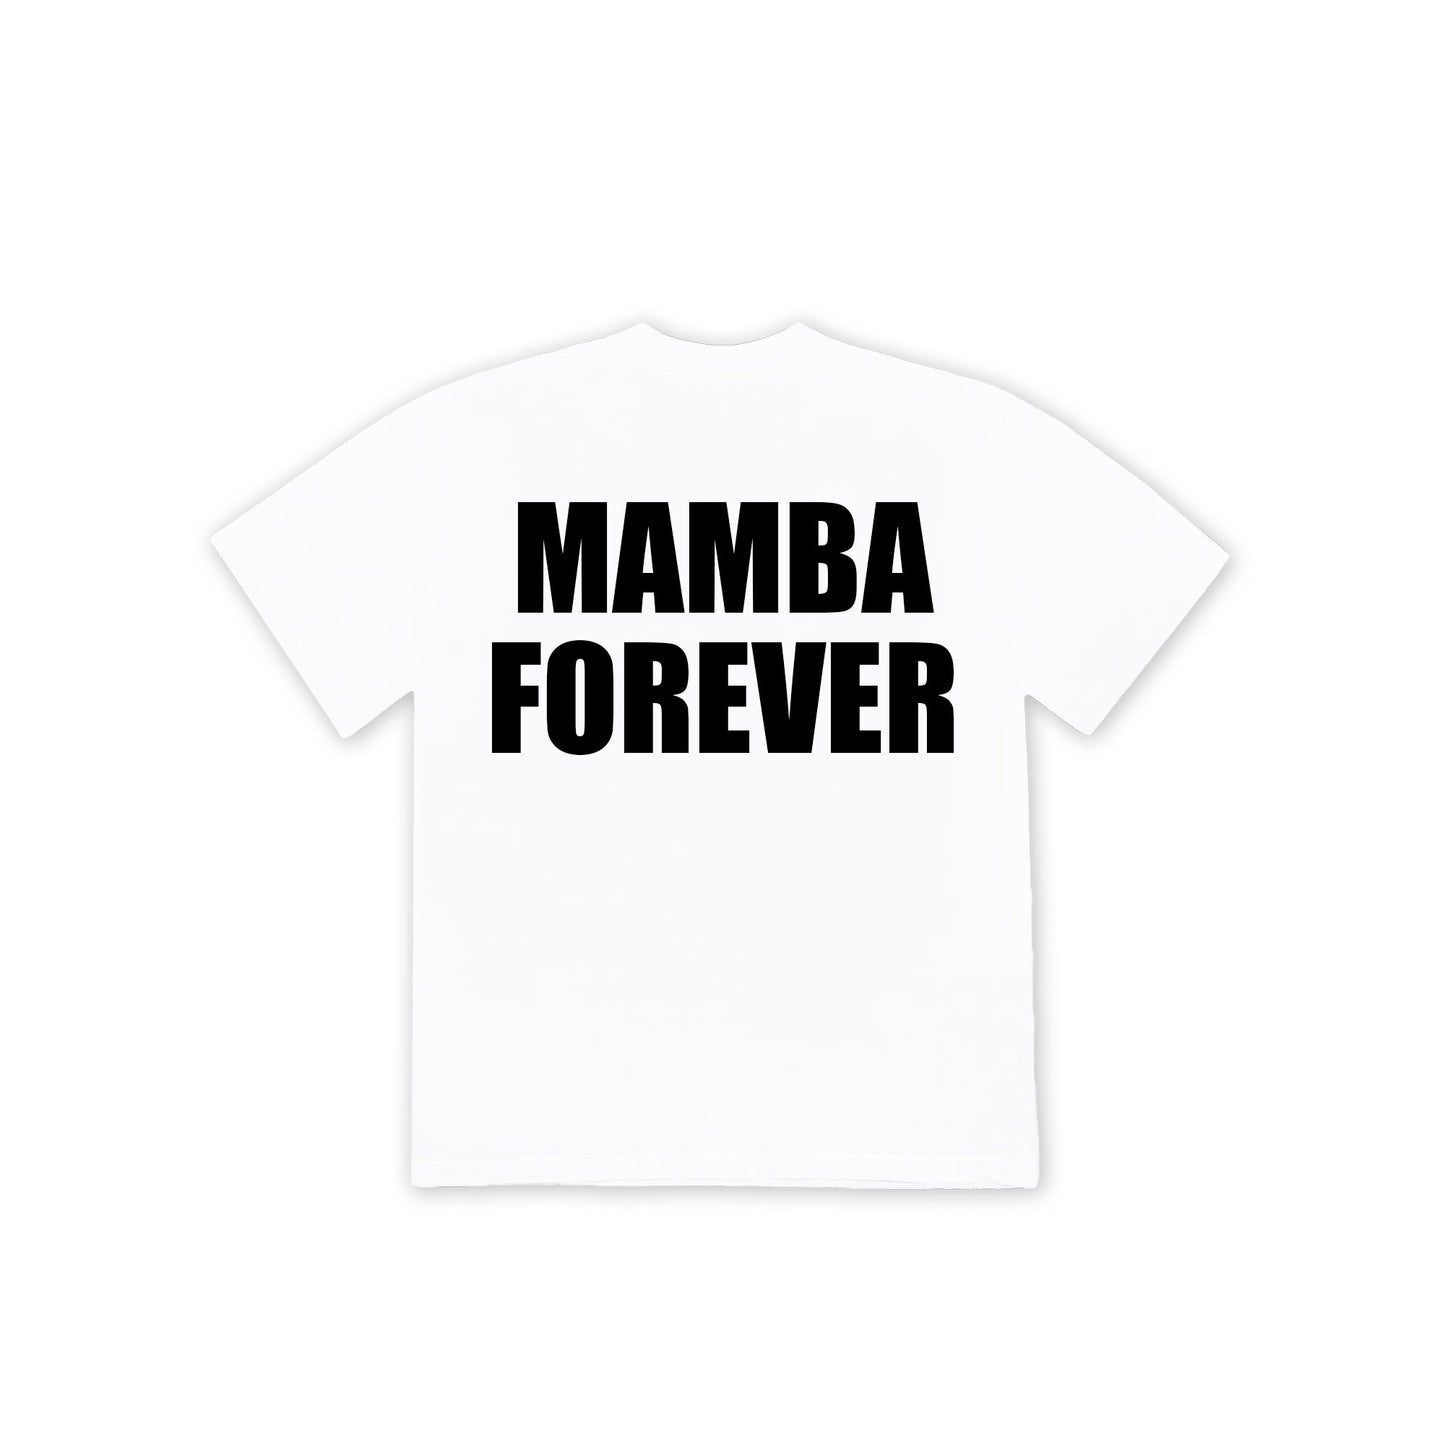 EARLY ACCESS: UNCIVILIZED "MAMBA FOREVER" T-SHIRT